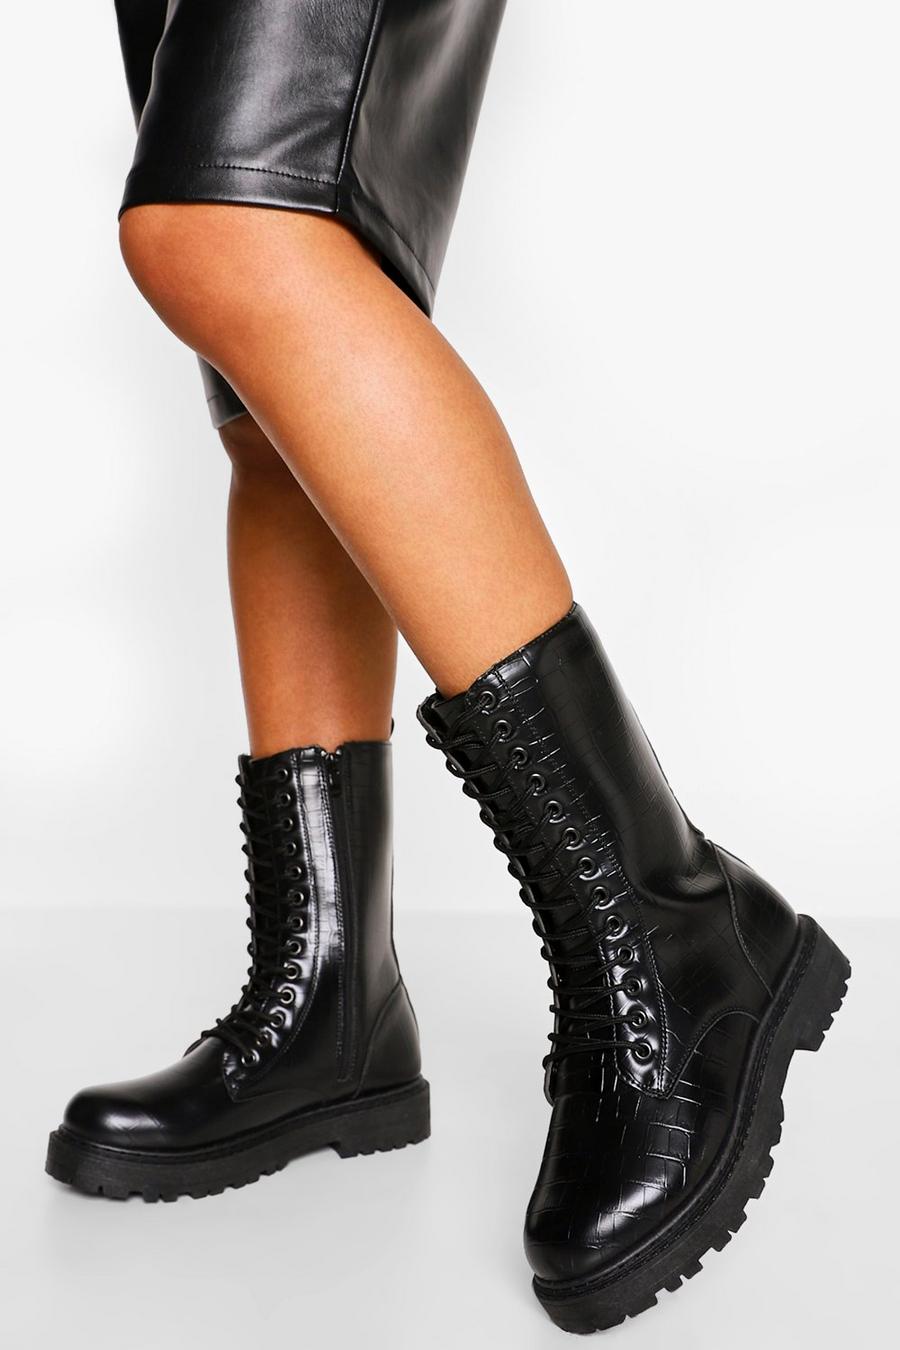 Black Wide Width Croc Calf High Chunky Combat Boots image number 1